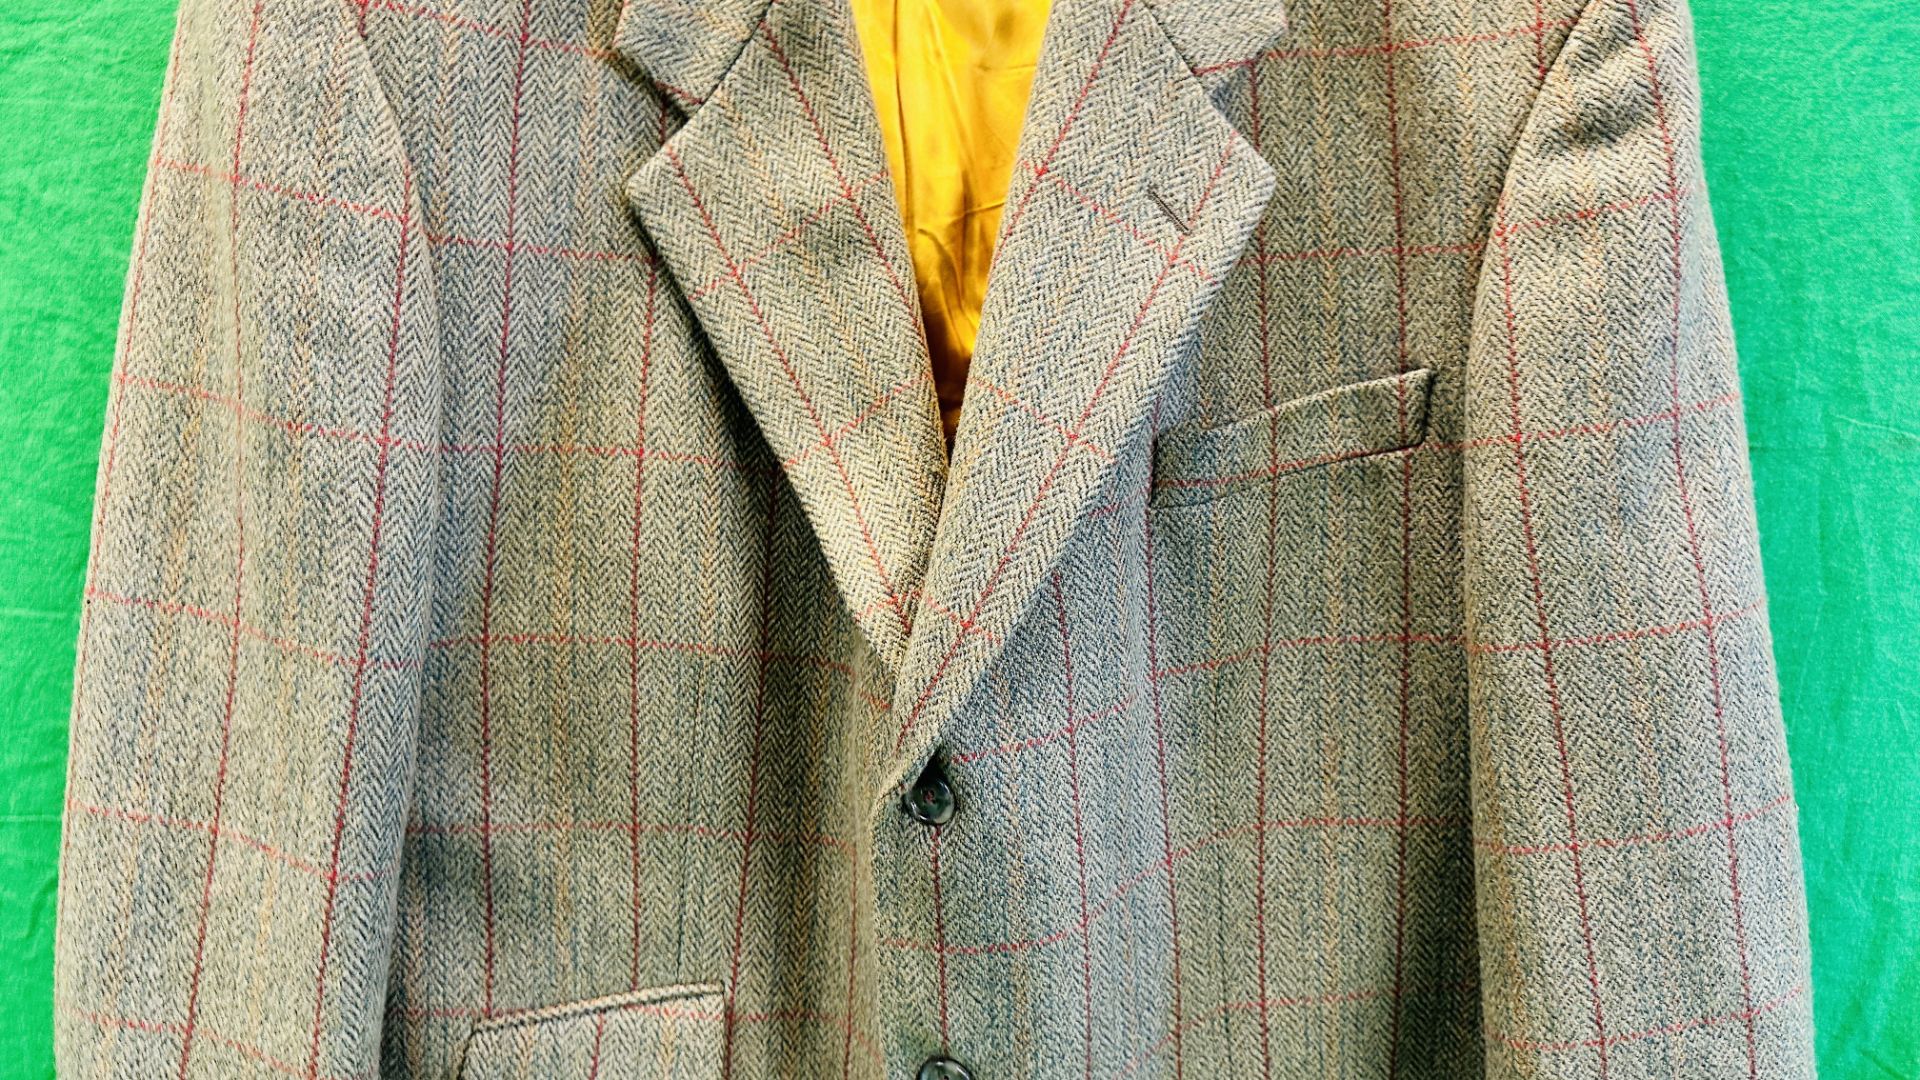 A GENTS RATCATCHER COUNTRY TWEED 100% PURE WOOL JACKET, SIZE 48L. - Image 3 of 5